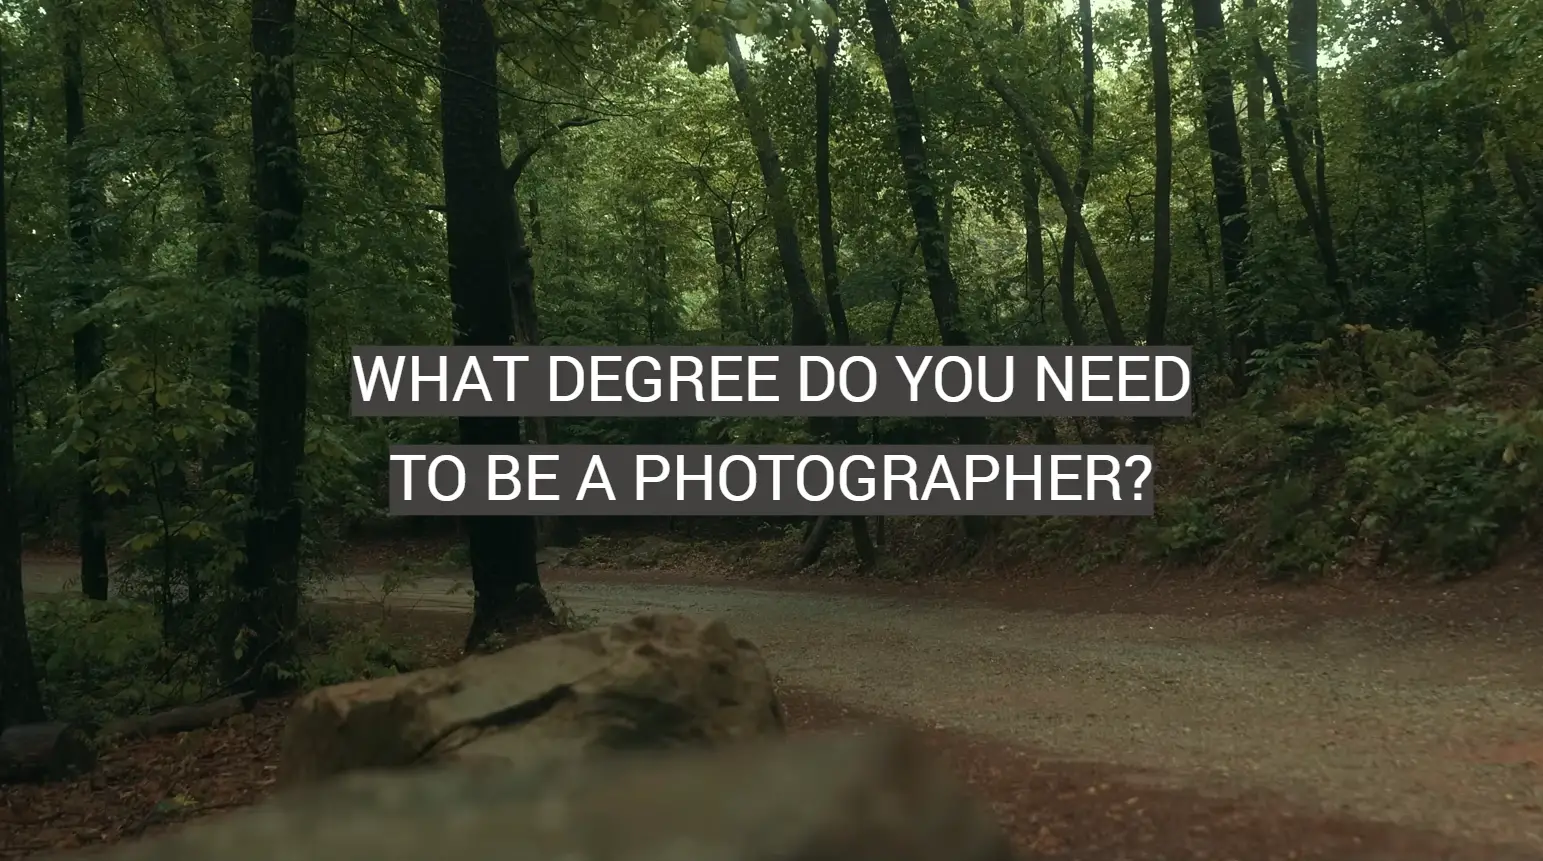 What Degree Do You Need to Be a Photographer?